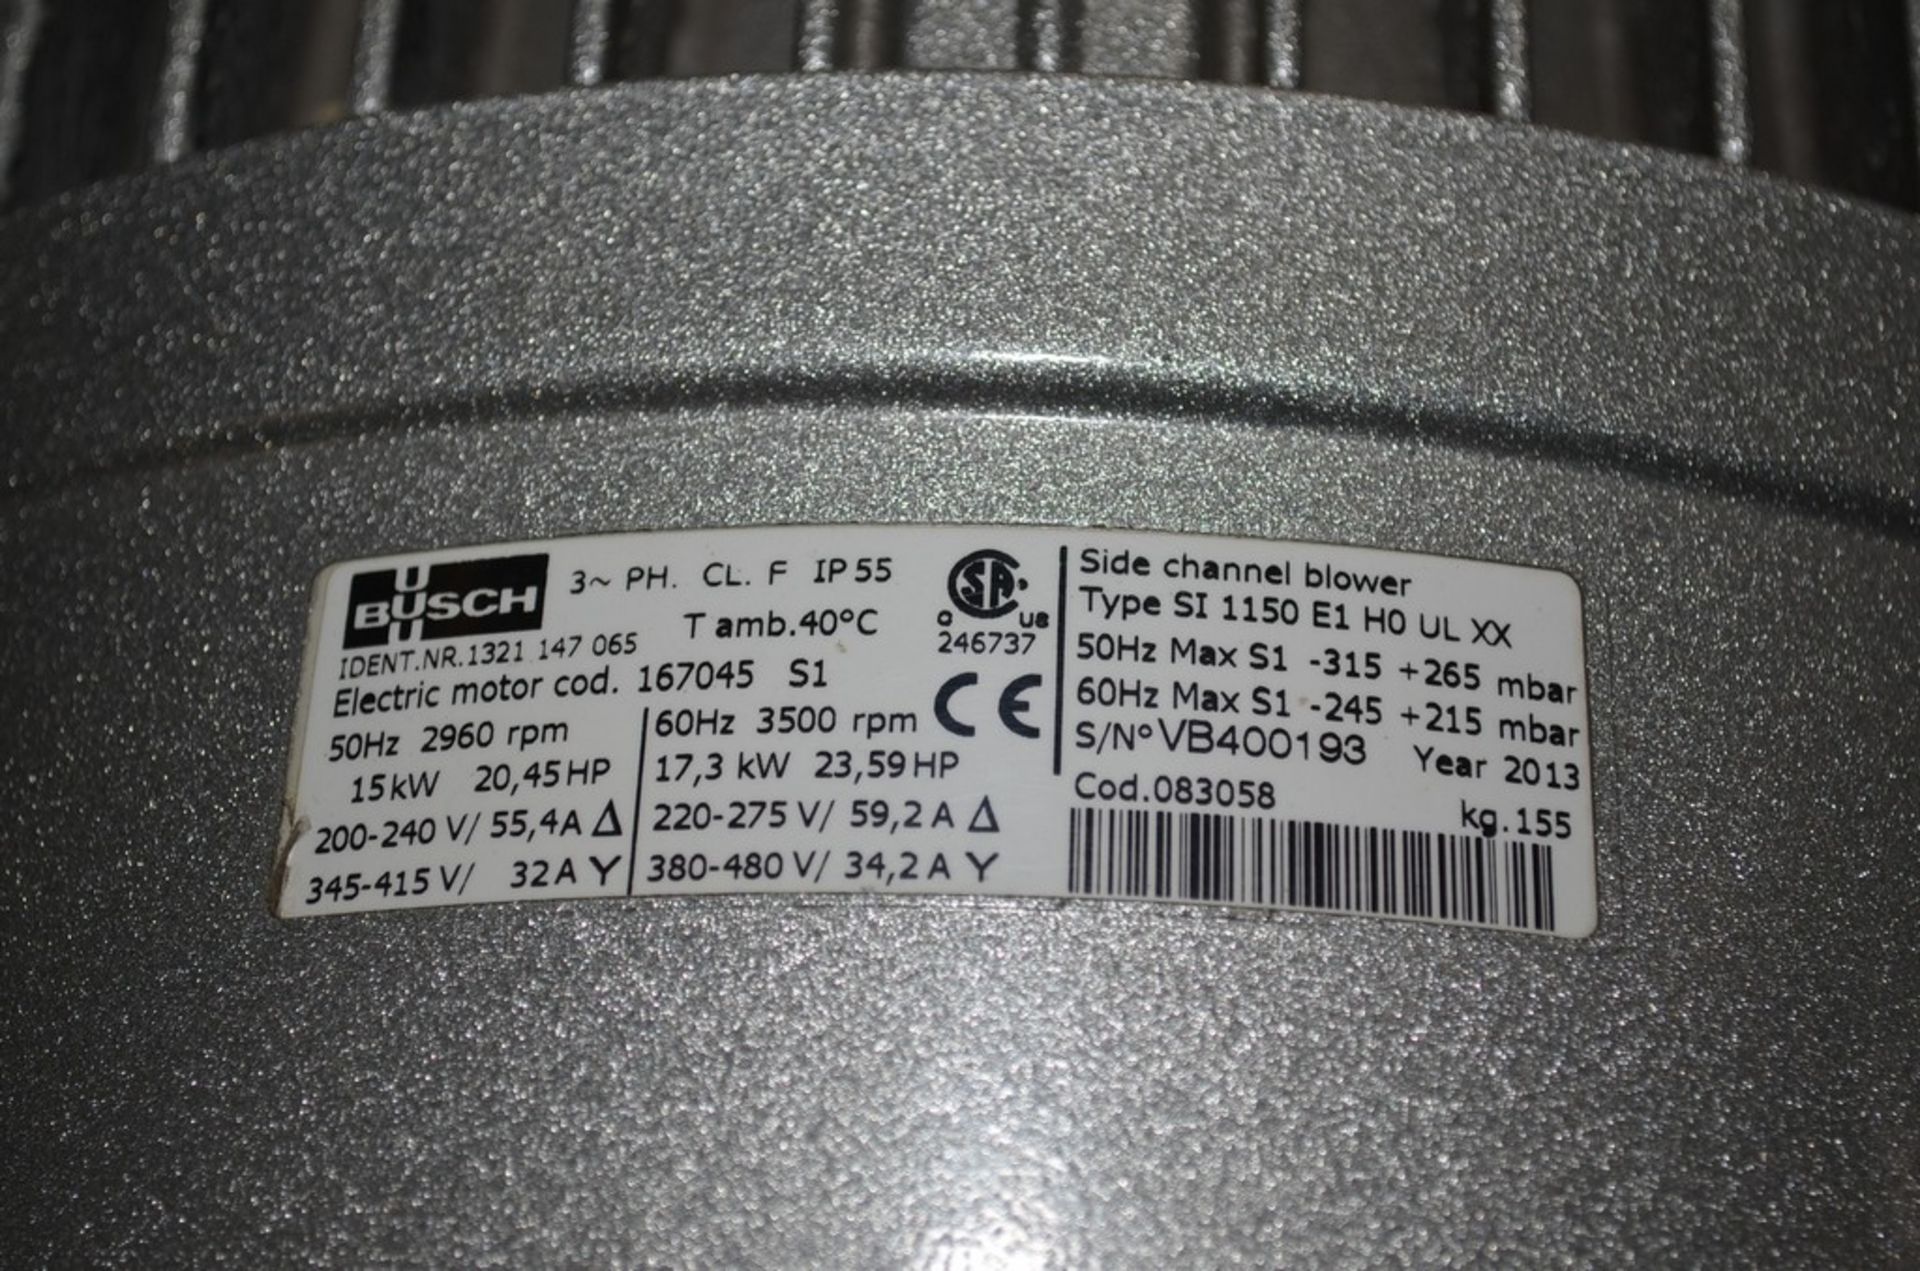 Busch Model SI1150E1H0ULXX Blower. Nominal Pumping Speed 848 AFCM. 4 in Diameter Inlet and Outlet. - Image 15 of 15